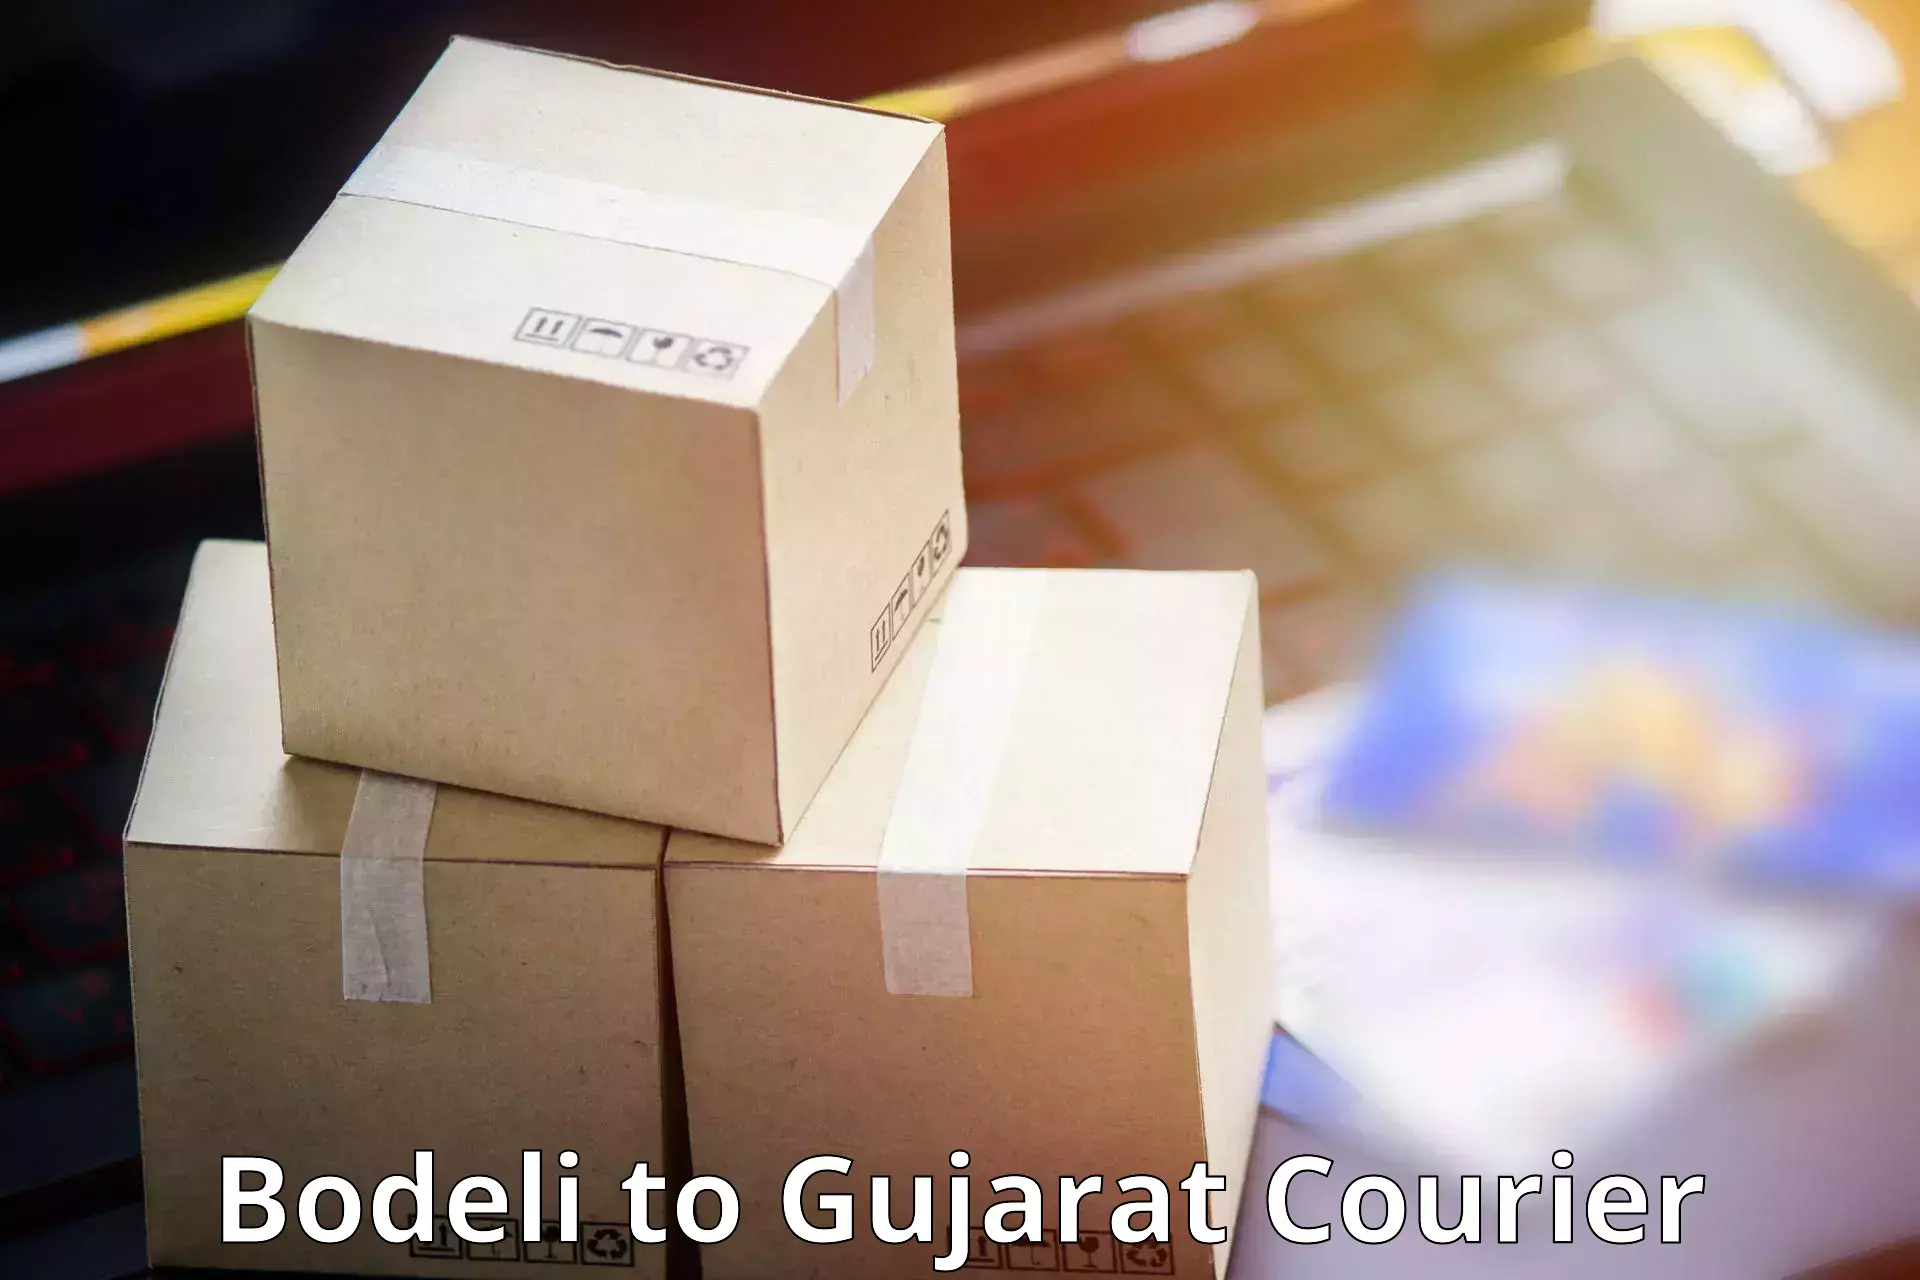 Residential courier service Bodeli to Gujarat